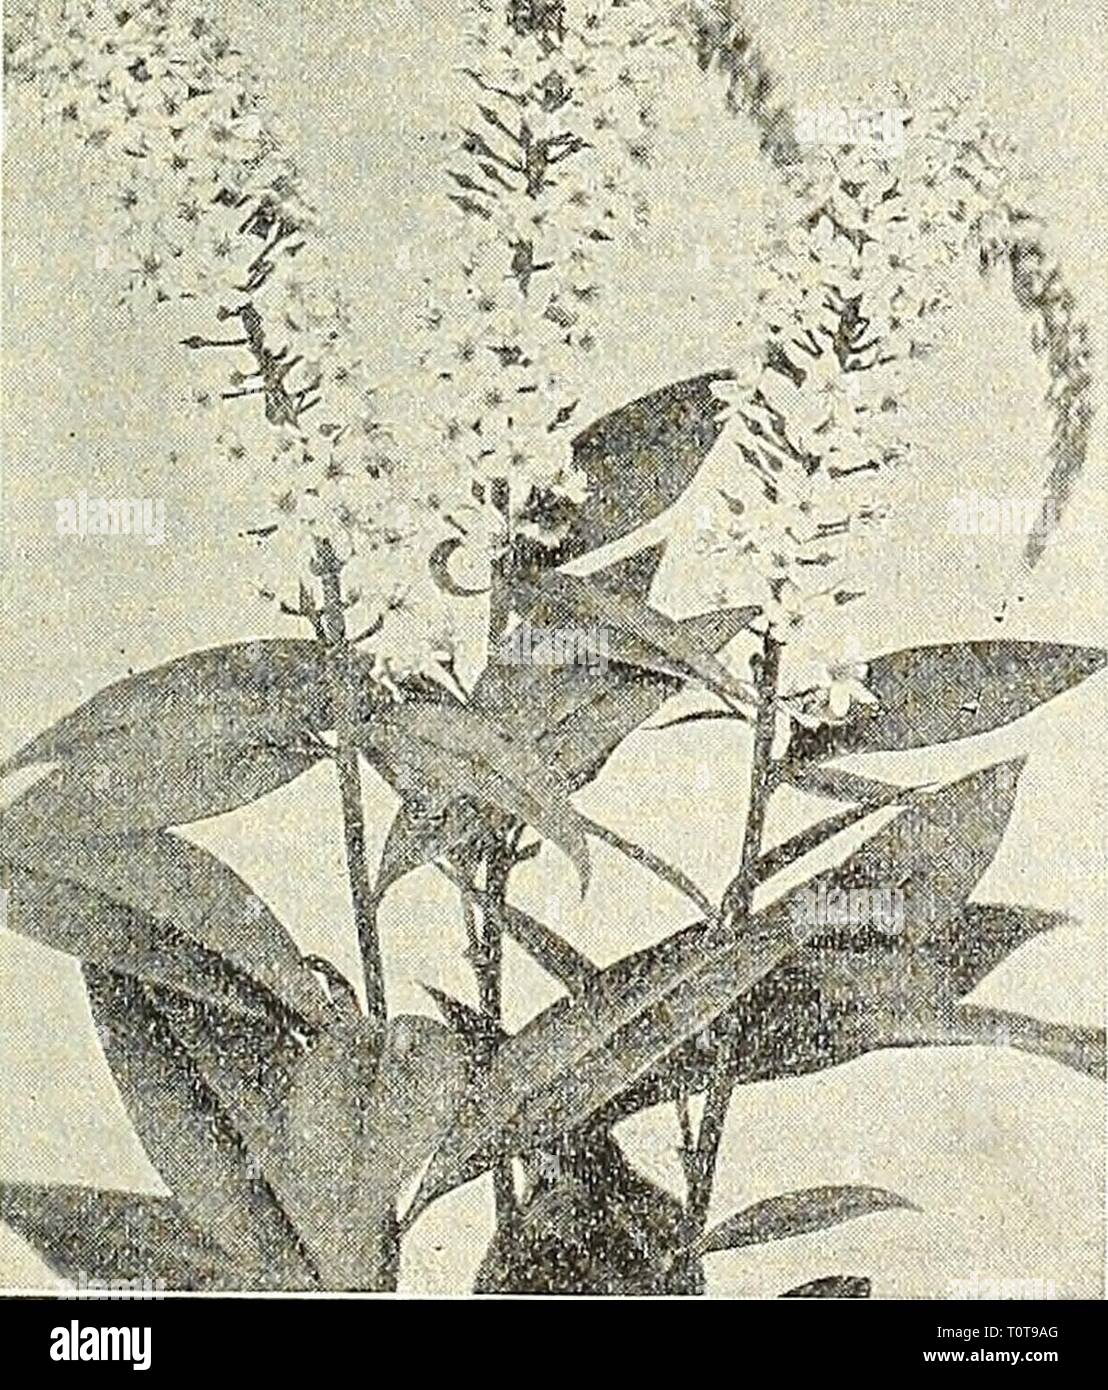 Dreer's garden book  1904 Dreer's garden book : 1904  dreersgardenbook1904henr Year: 1904  L',IMA(,HIA CLETHKOIUFS LiLiuM Speciosum Rubrum I.YSIMACHIA. Ciliata {Fringed Loosestrife). Grows 2 feet liigh, with lemon- yellow flowers in July. Clethroides {Loose-strife). A fine hardy variety, growing about 2 feet high, with long, dense, re- curved spikes of pure white flow- ers from July to Sep. (See cut.) NummuEaria {Creeping Jenny, or iMoney-woi!). Valuable for plant- ing under trees or shrubs where grass will not grow, where it quickly forms a dense carpet. — Aurea. A golden-leaved form of the  Stock Photo